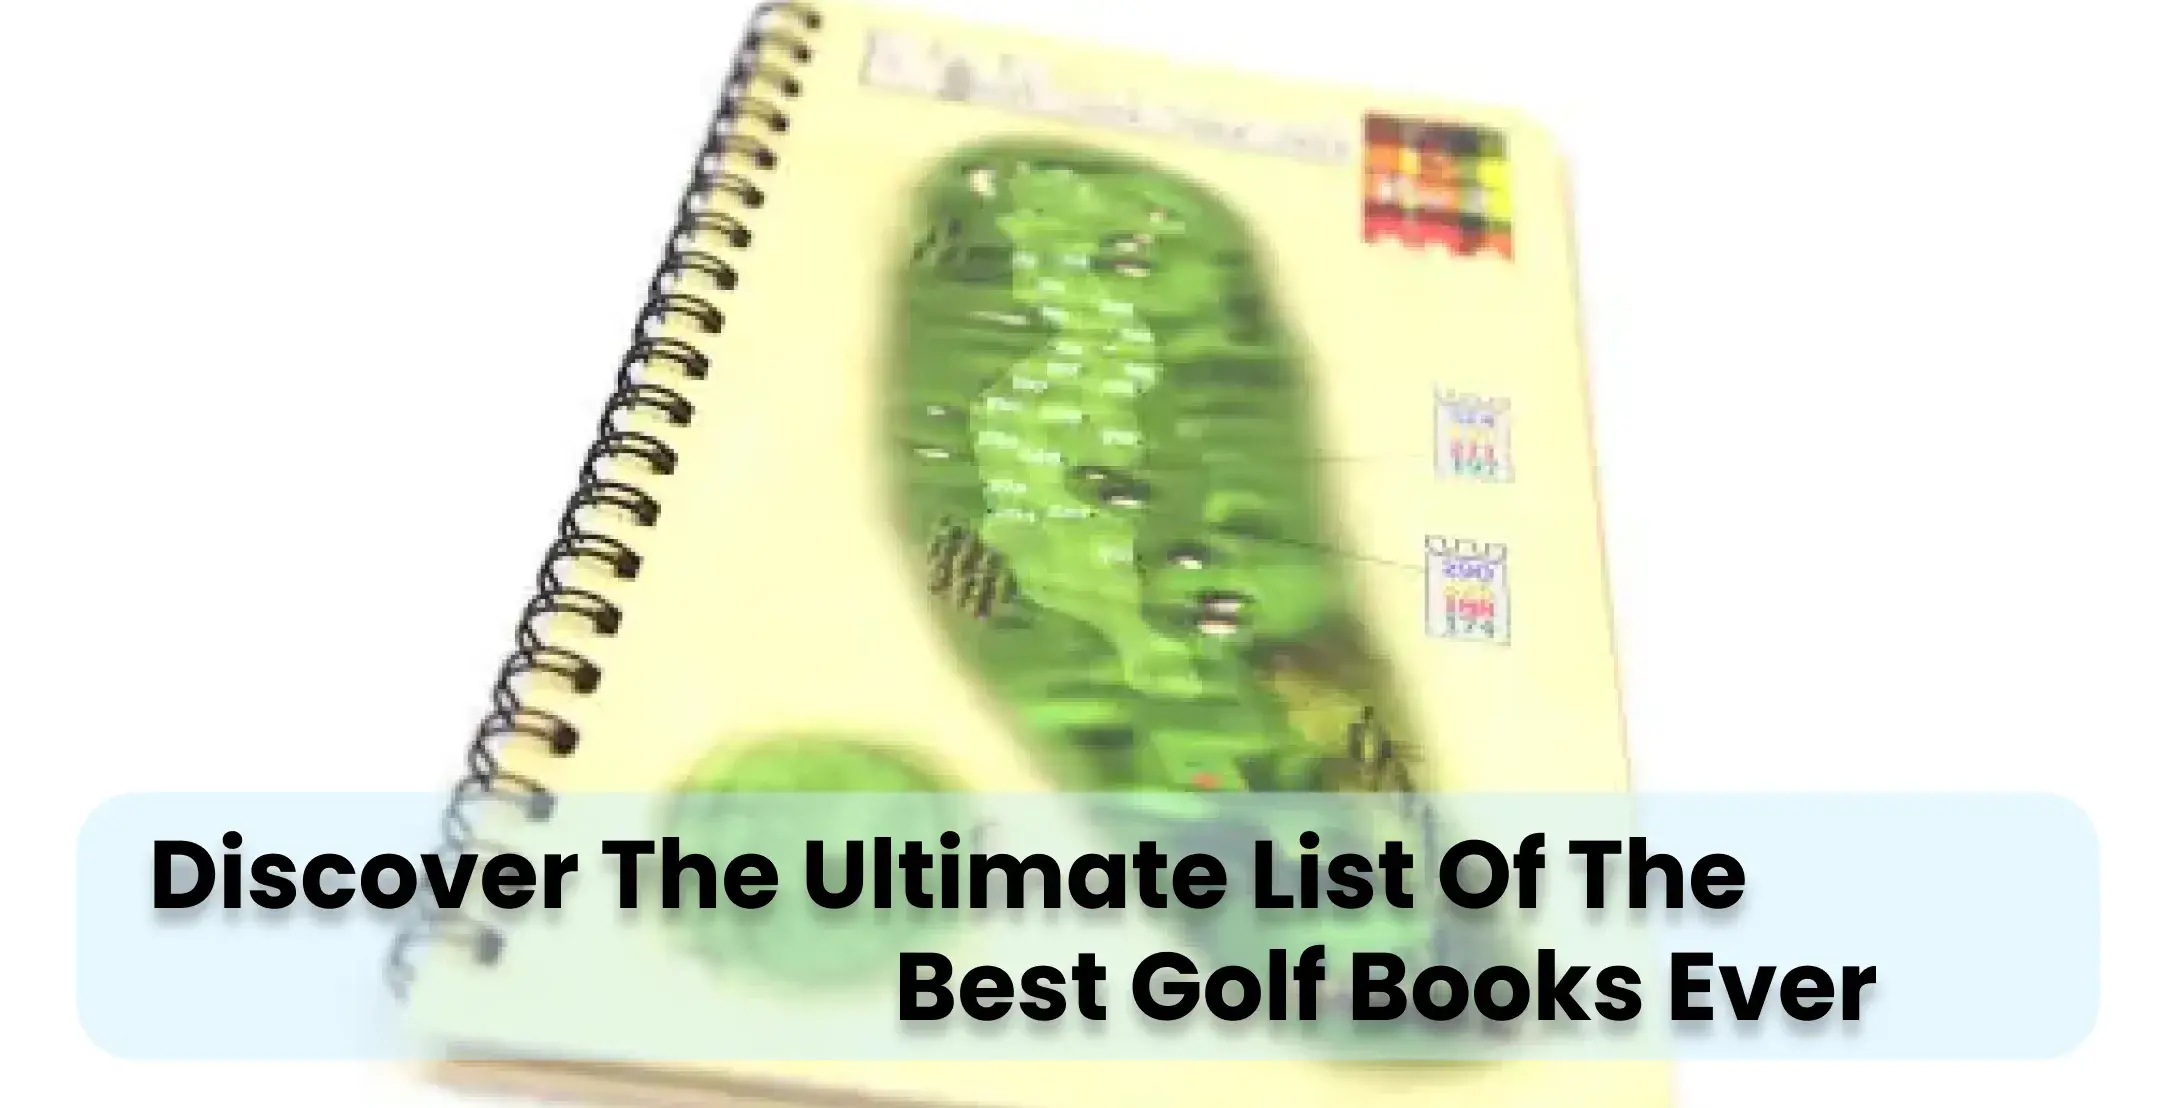 Discover The Ultimate List Of The Best Golf Books Ever